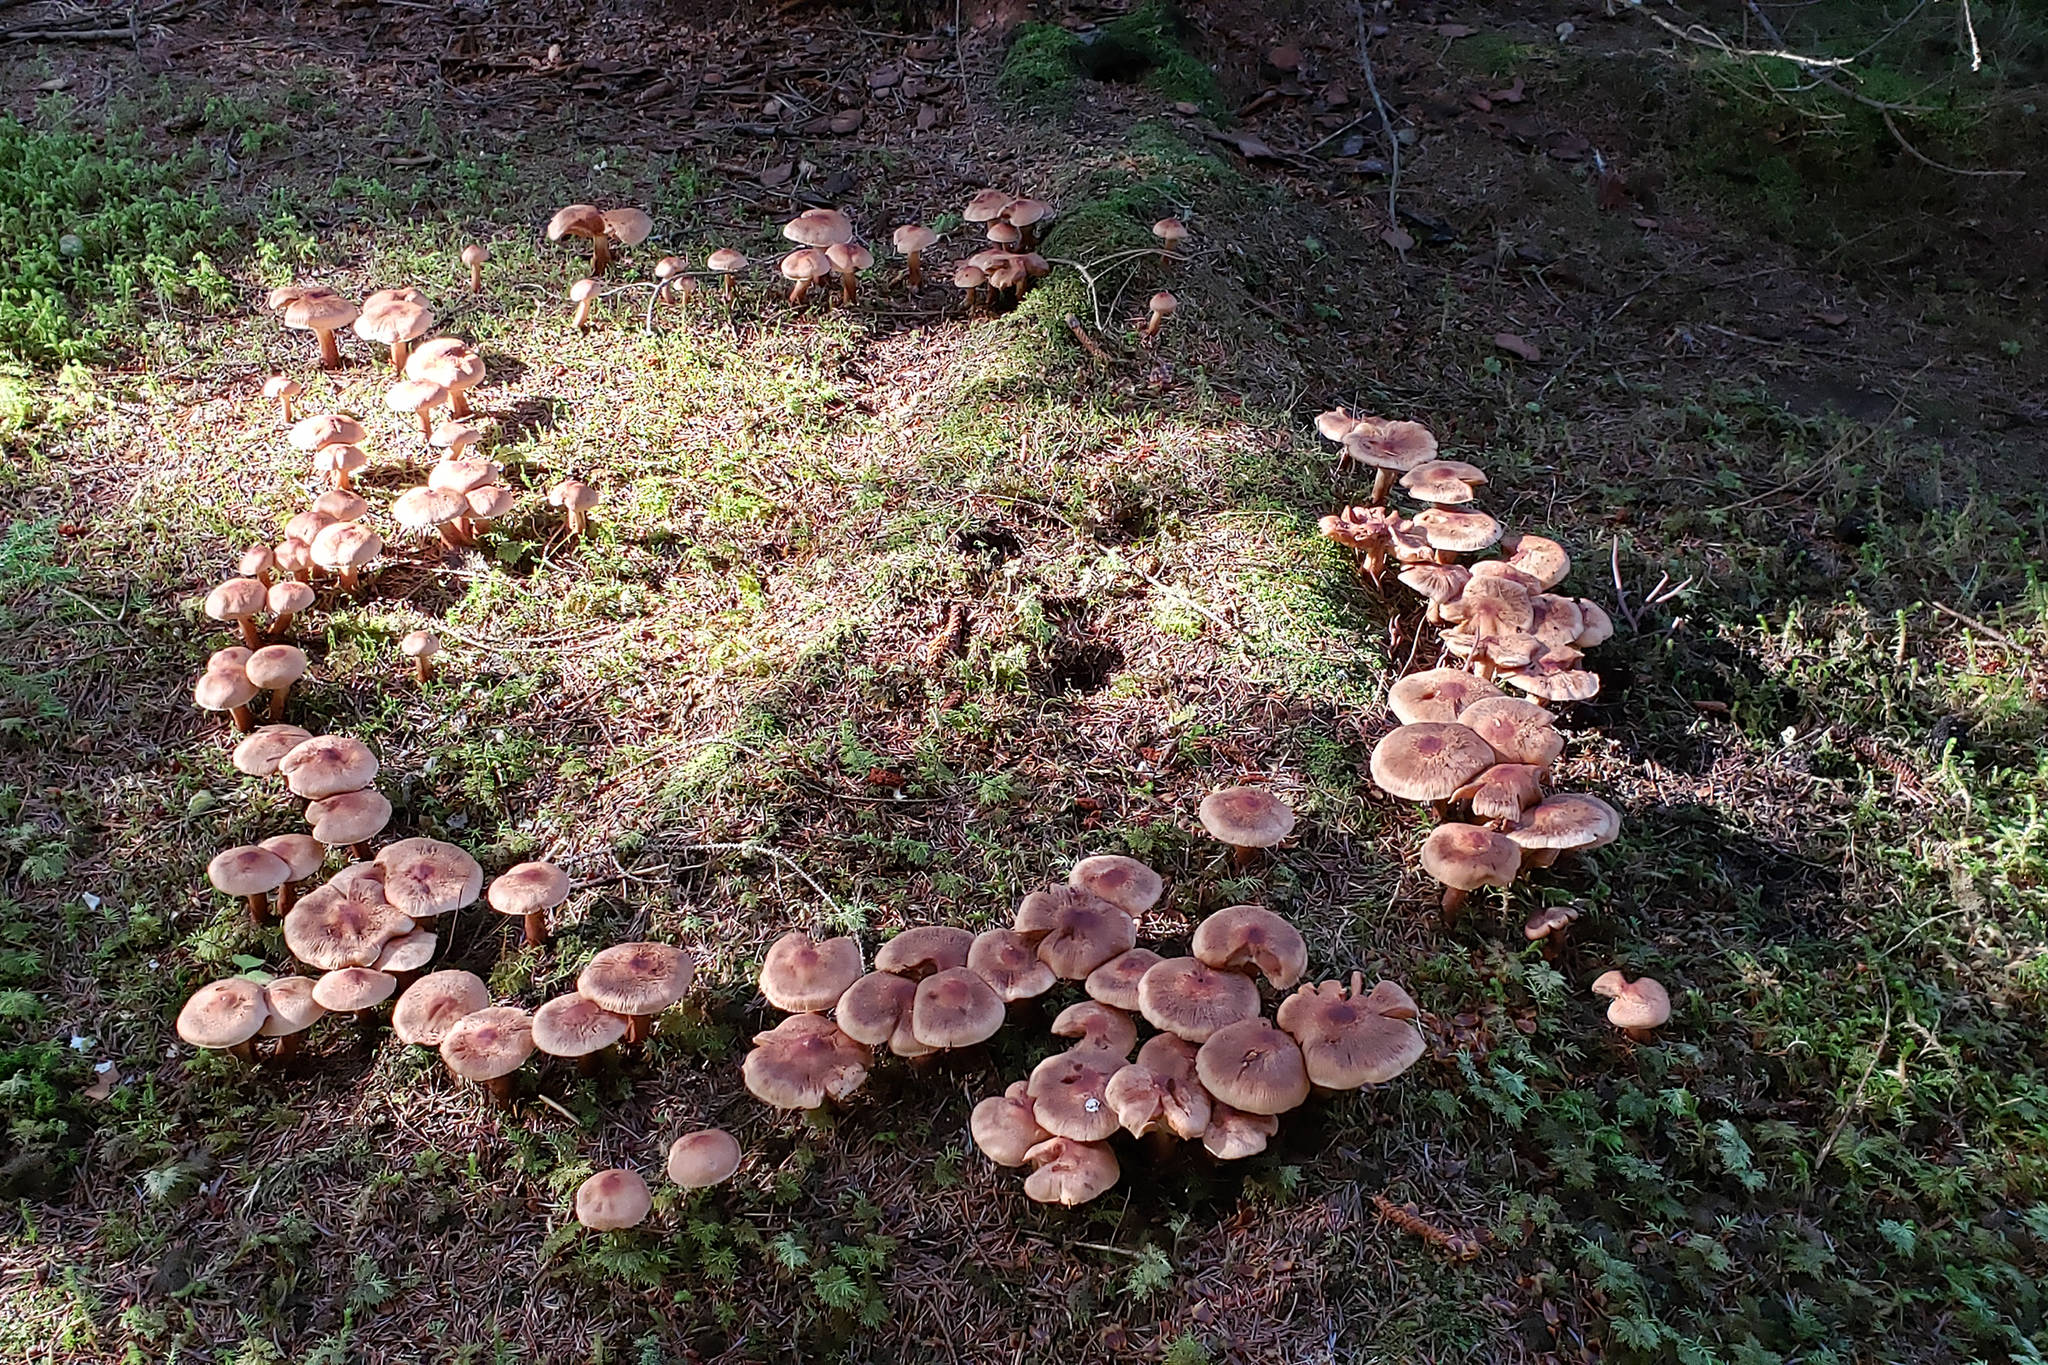 A fairy ring of Tricholoma mushrooms is pictured in the shade. (Courtesy Photo | Pam Bergeson)